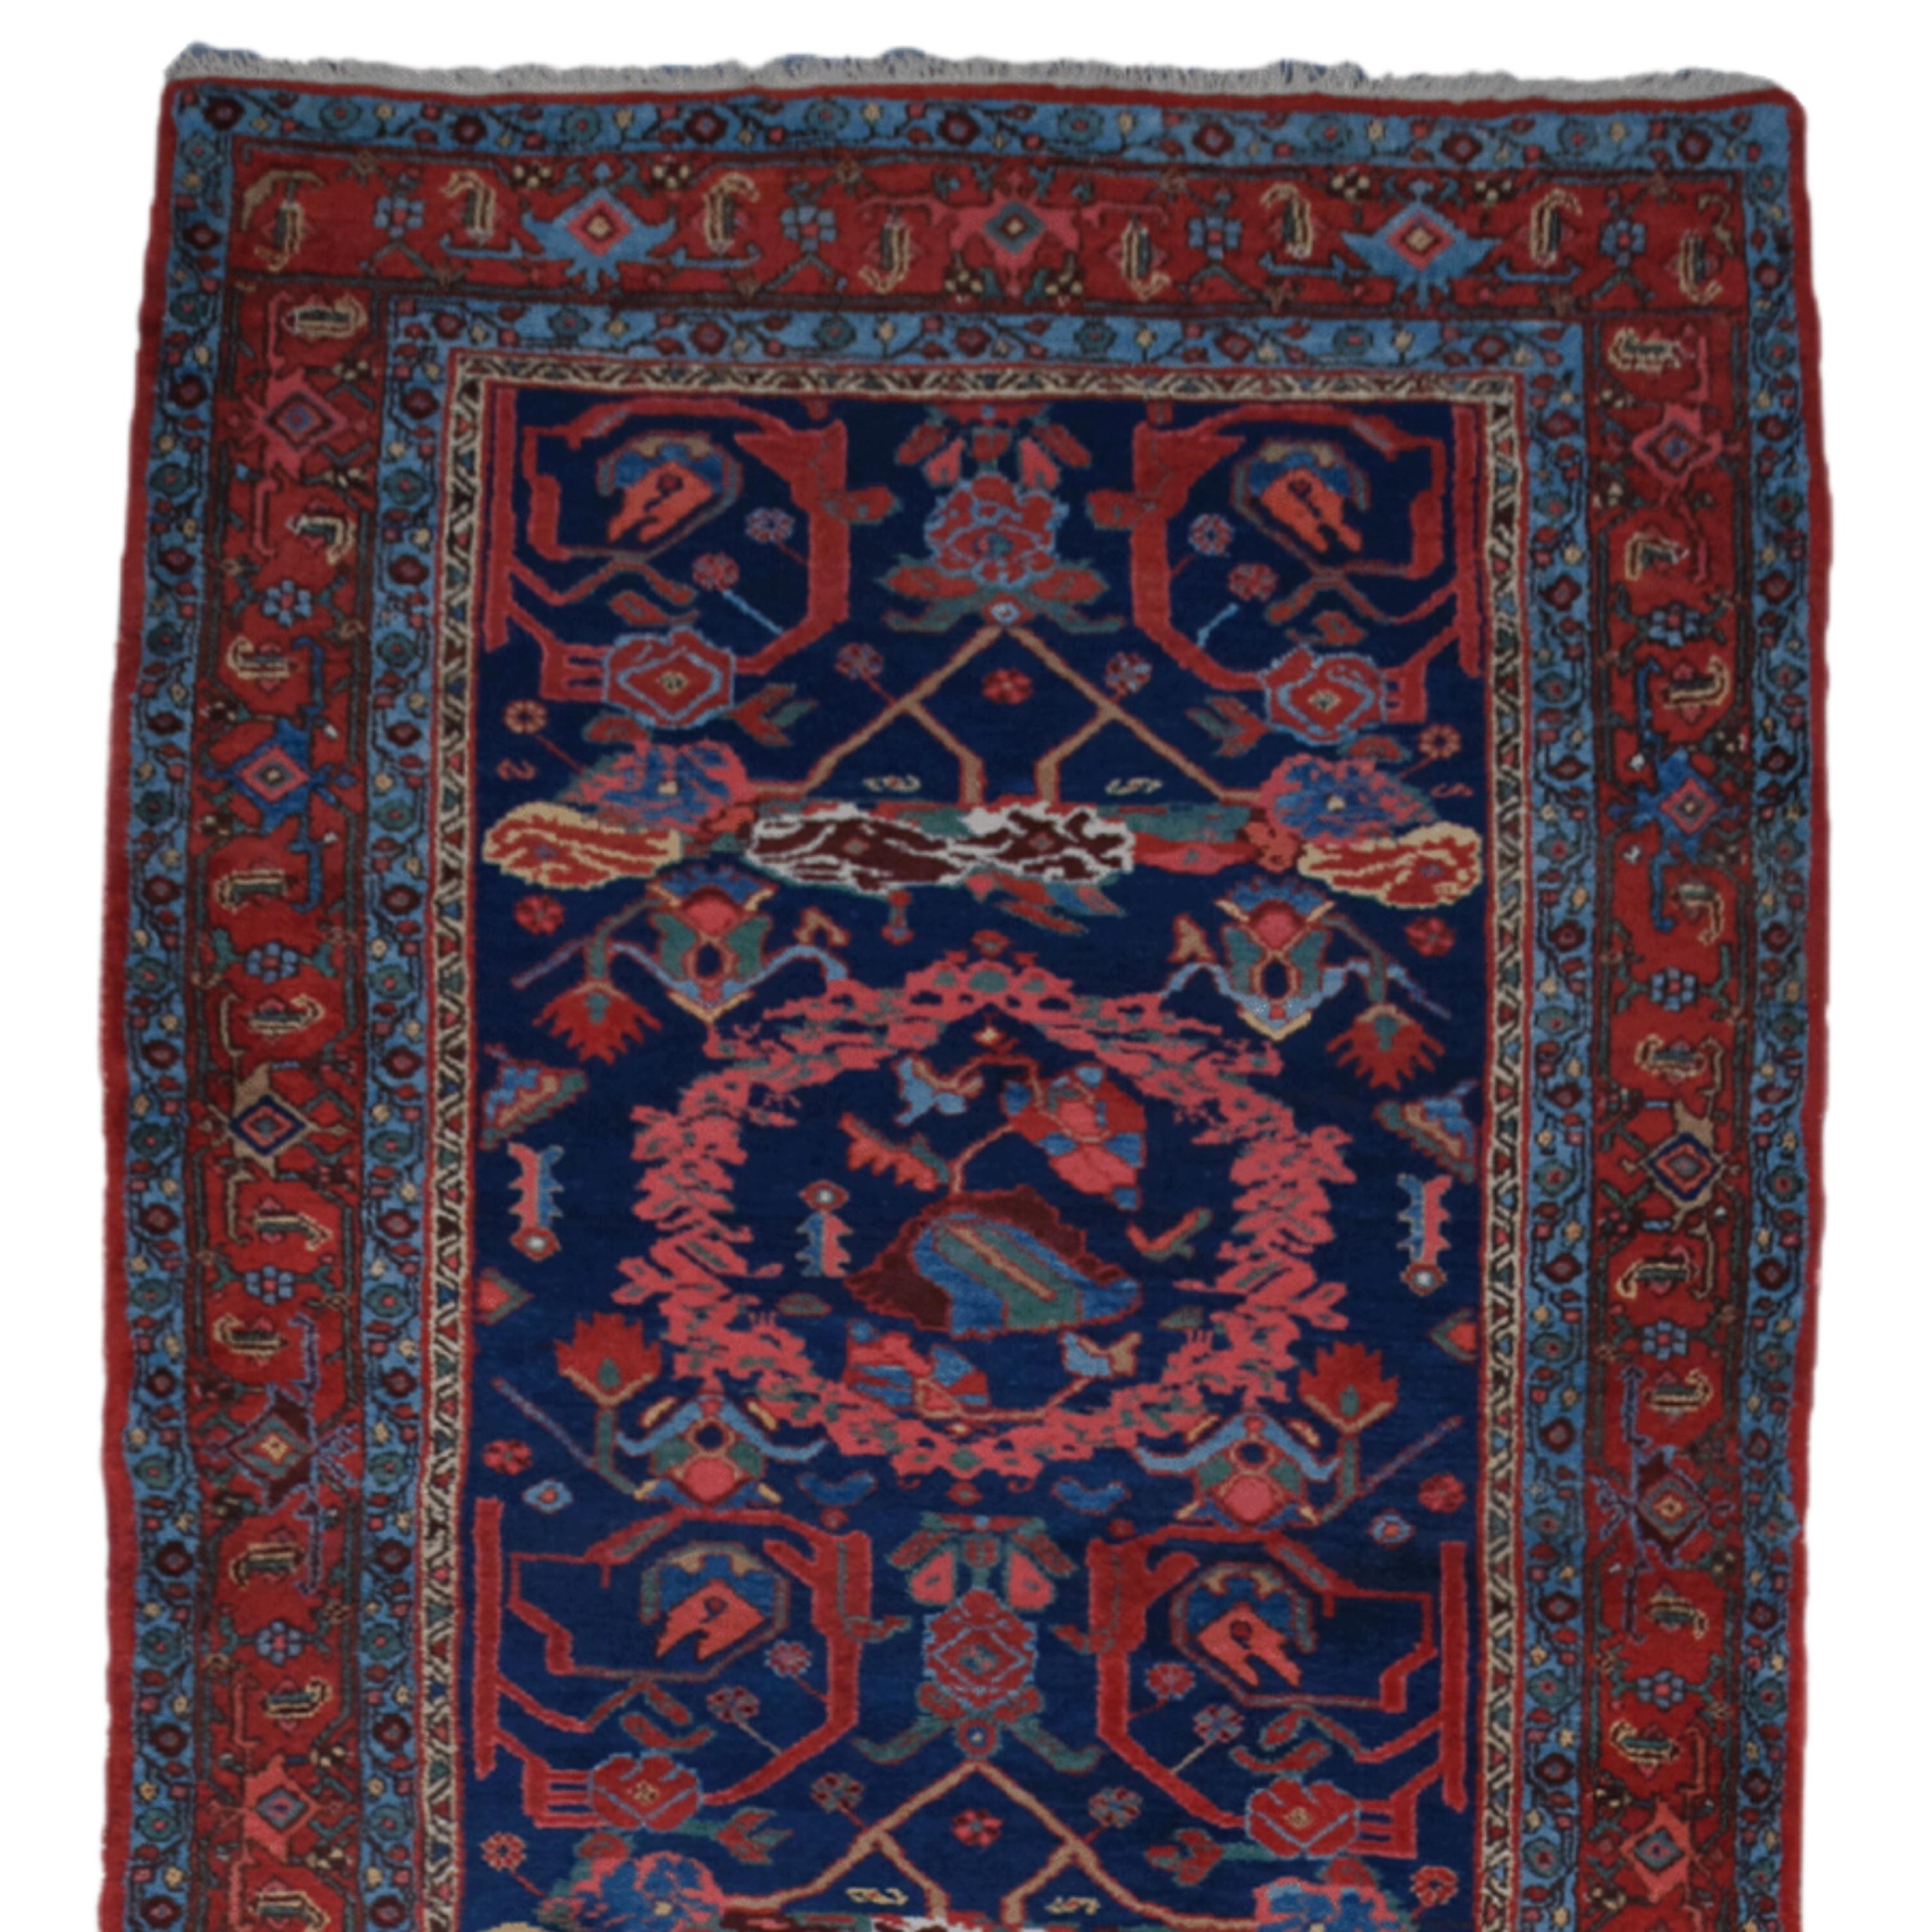 A Unique Piece of History This exquisite 19th century Bidjar runner is a carefully woven work of art that has stood the test of time. This handmade rug in rich shades of blue and red will add an authentic touch to your space.

Art Hidden in Details